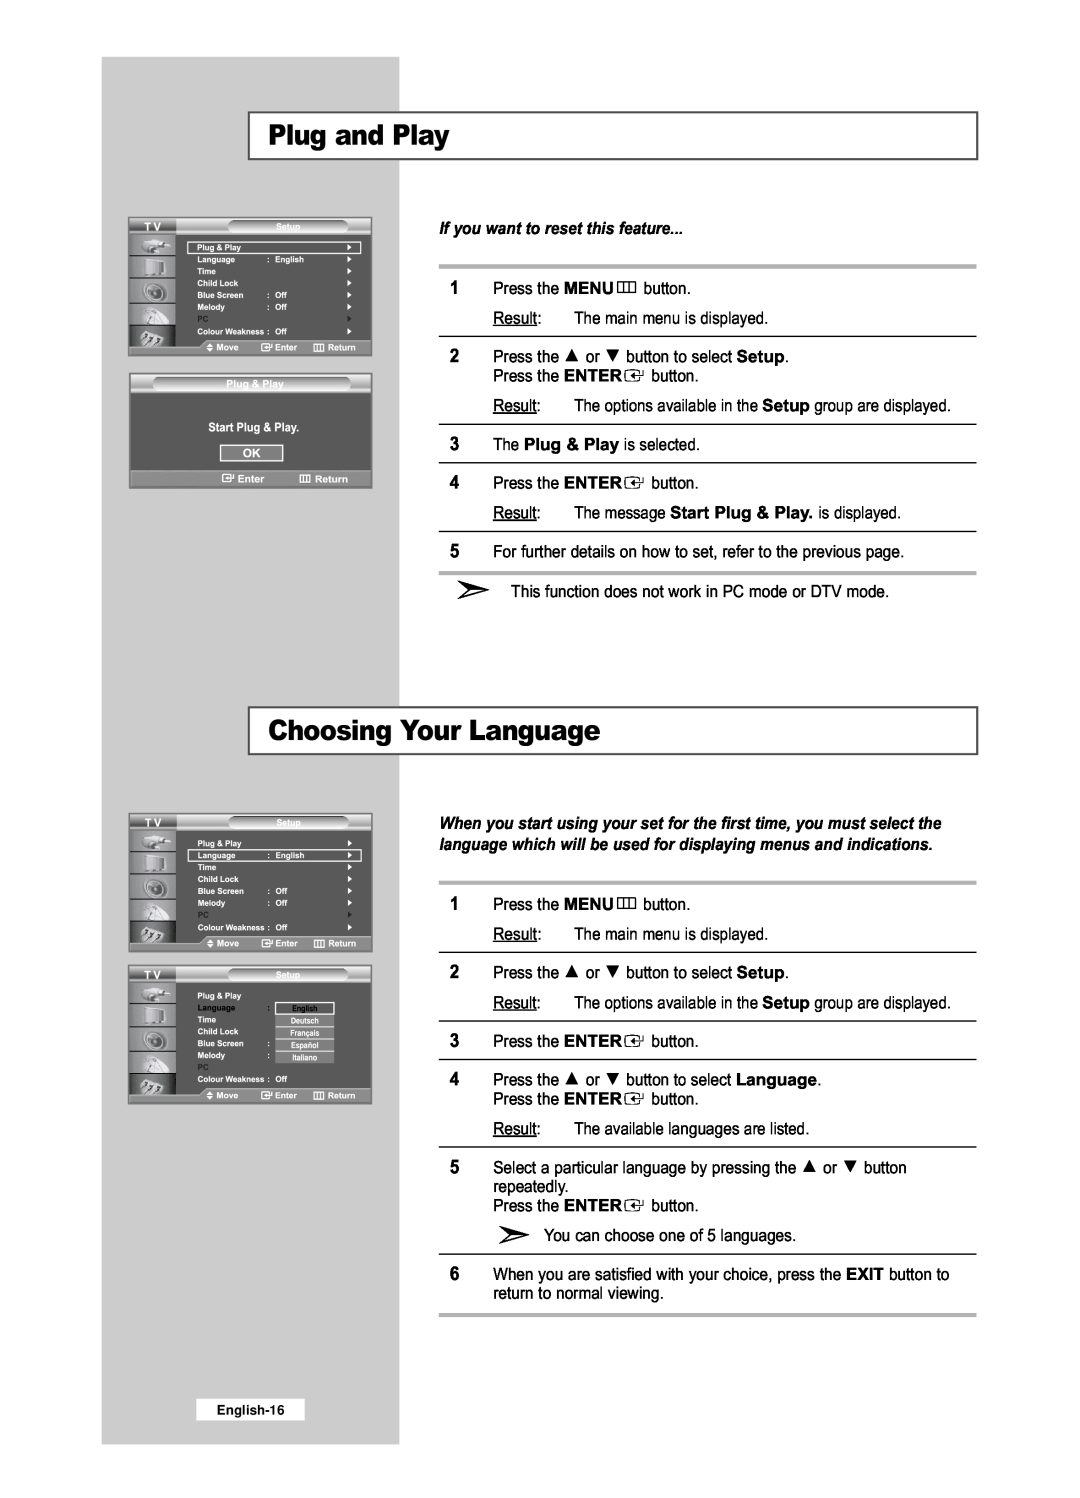 Samsung LE32R53BD, LE26R53BD manual Choosing Your Language, If you want to reset this feature, Plug and Play, English-16 